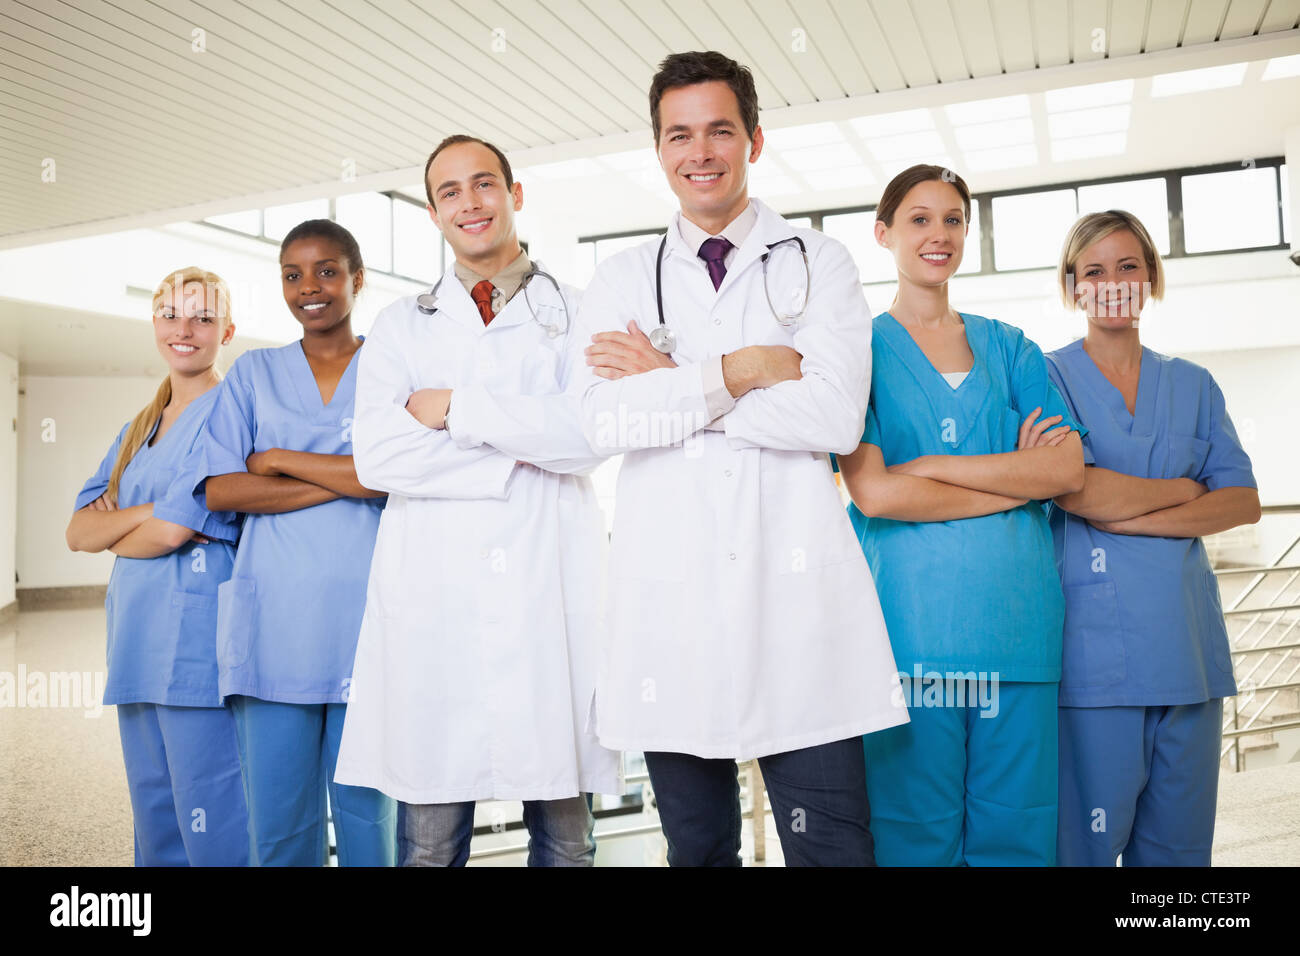 Doctors with nurses with arms crossed Stock Photo